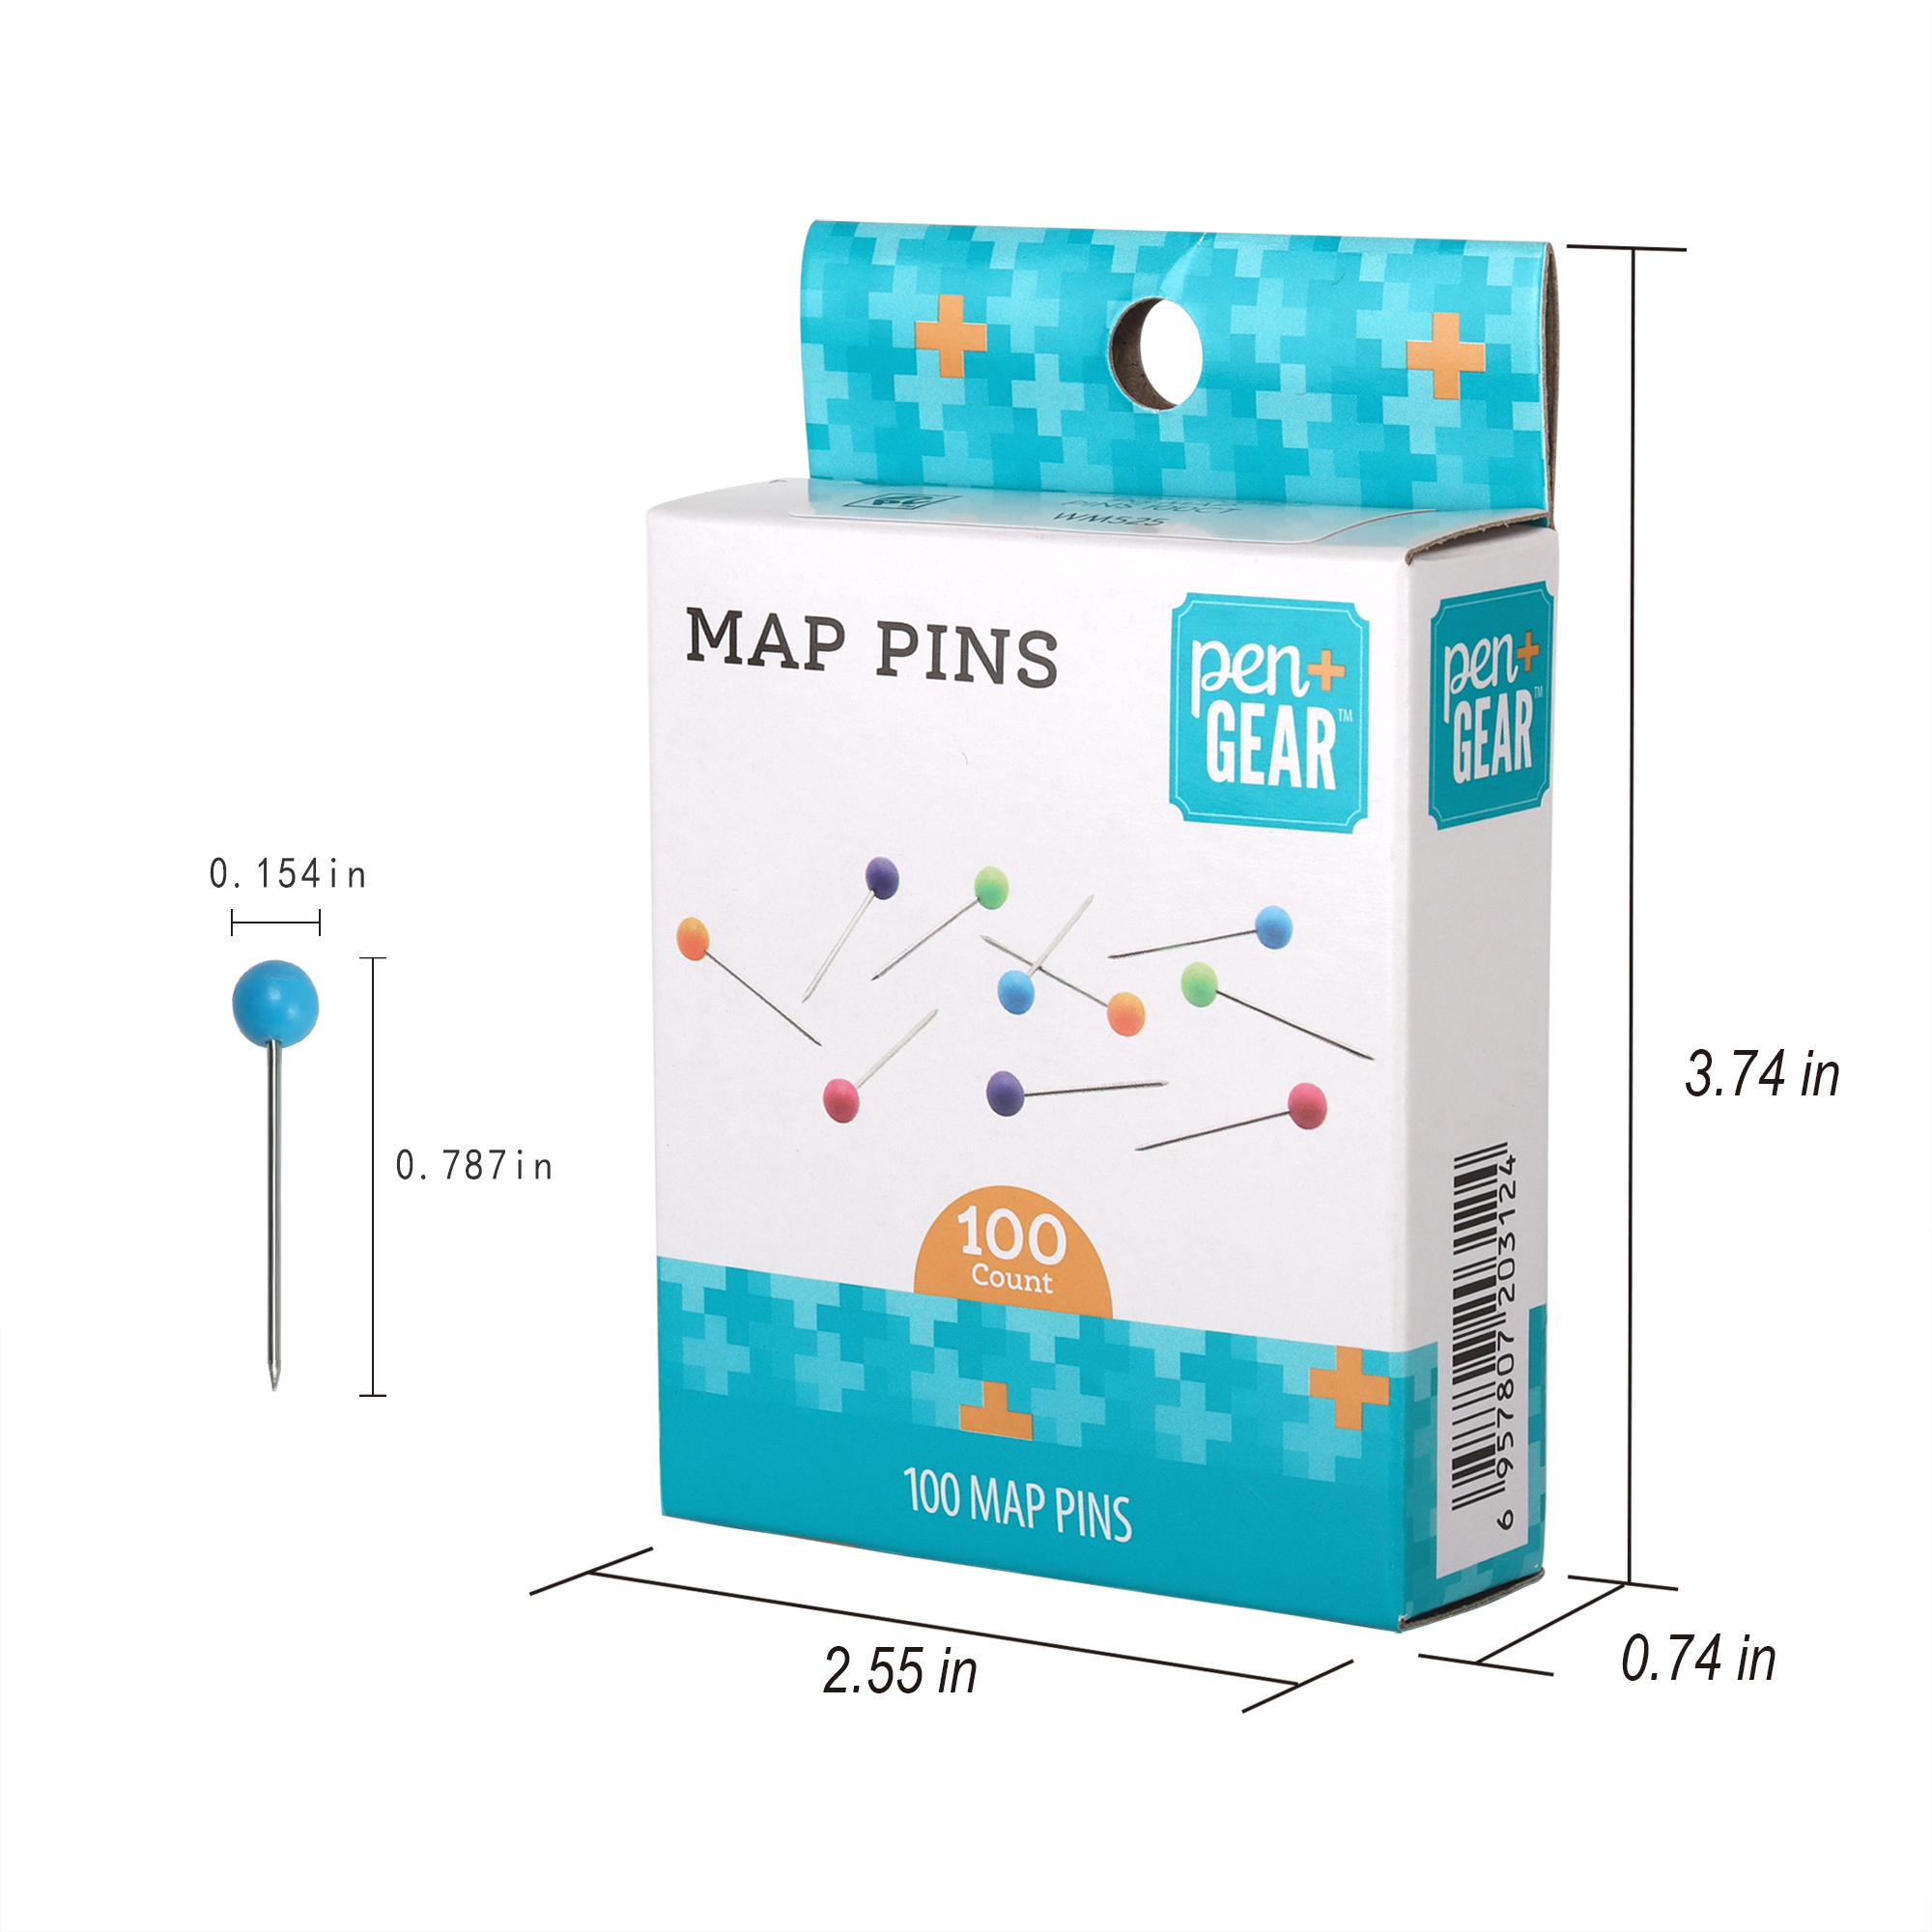 Pen + Gear Map Pins, Multiple Colors, Plastic and Steel,100 Count - image 5 of 9